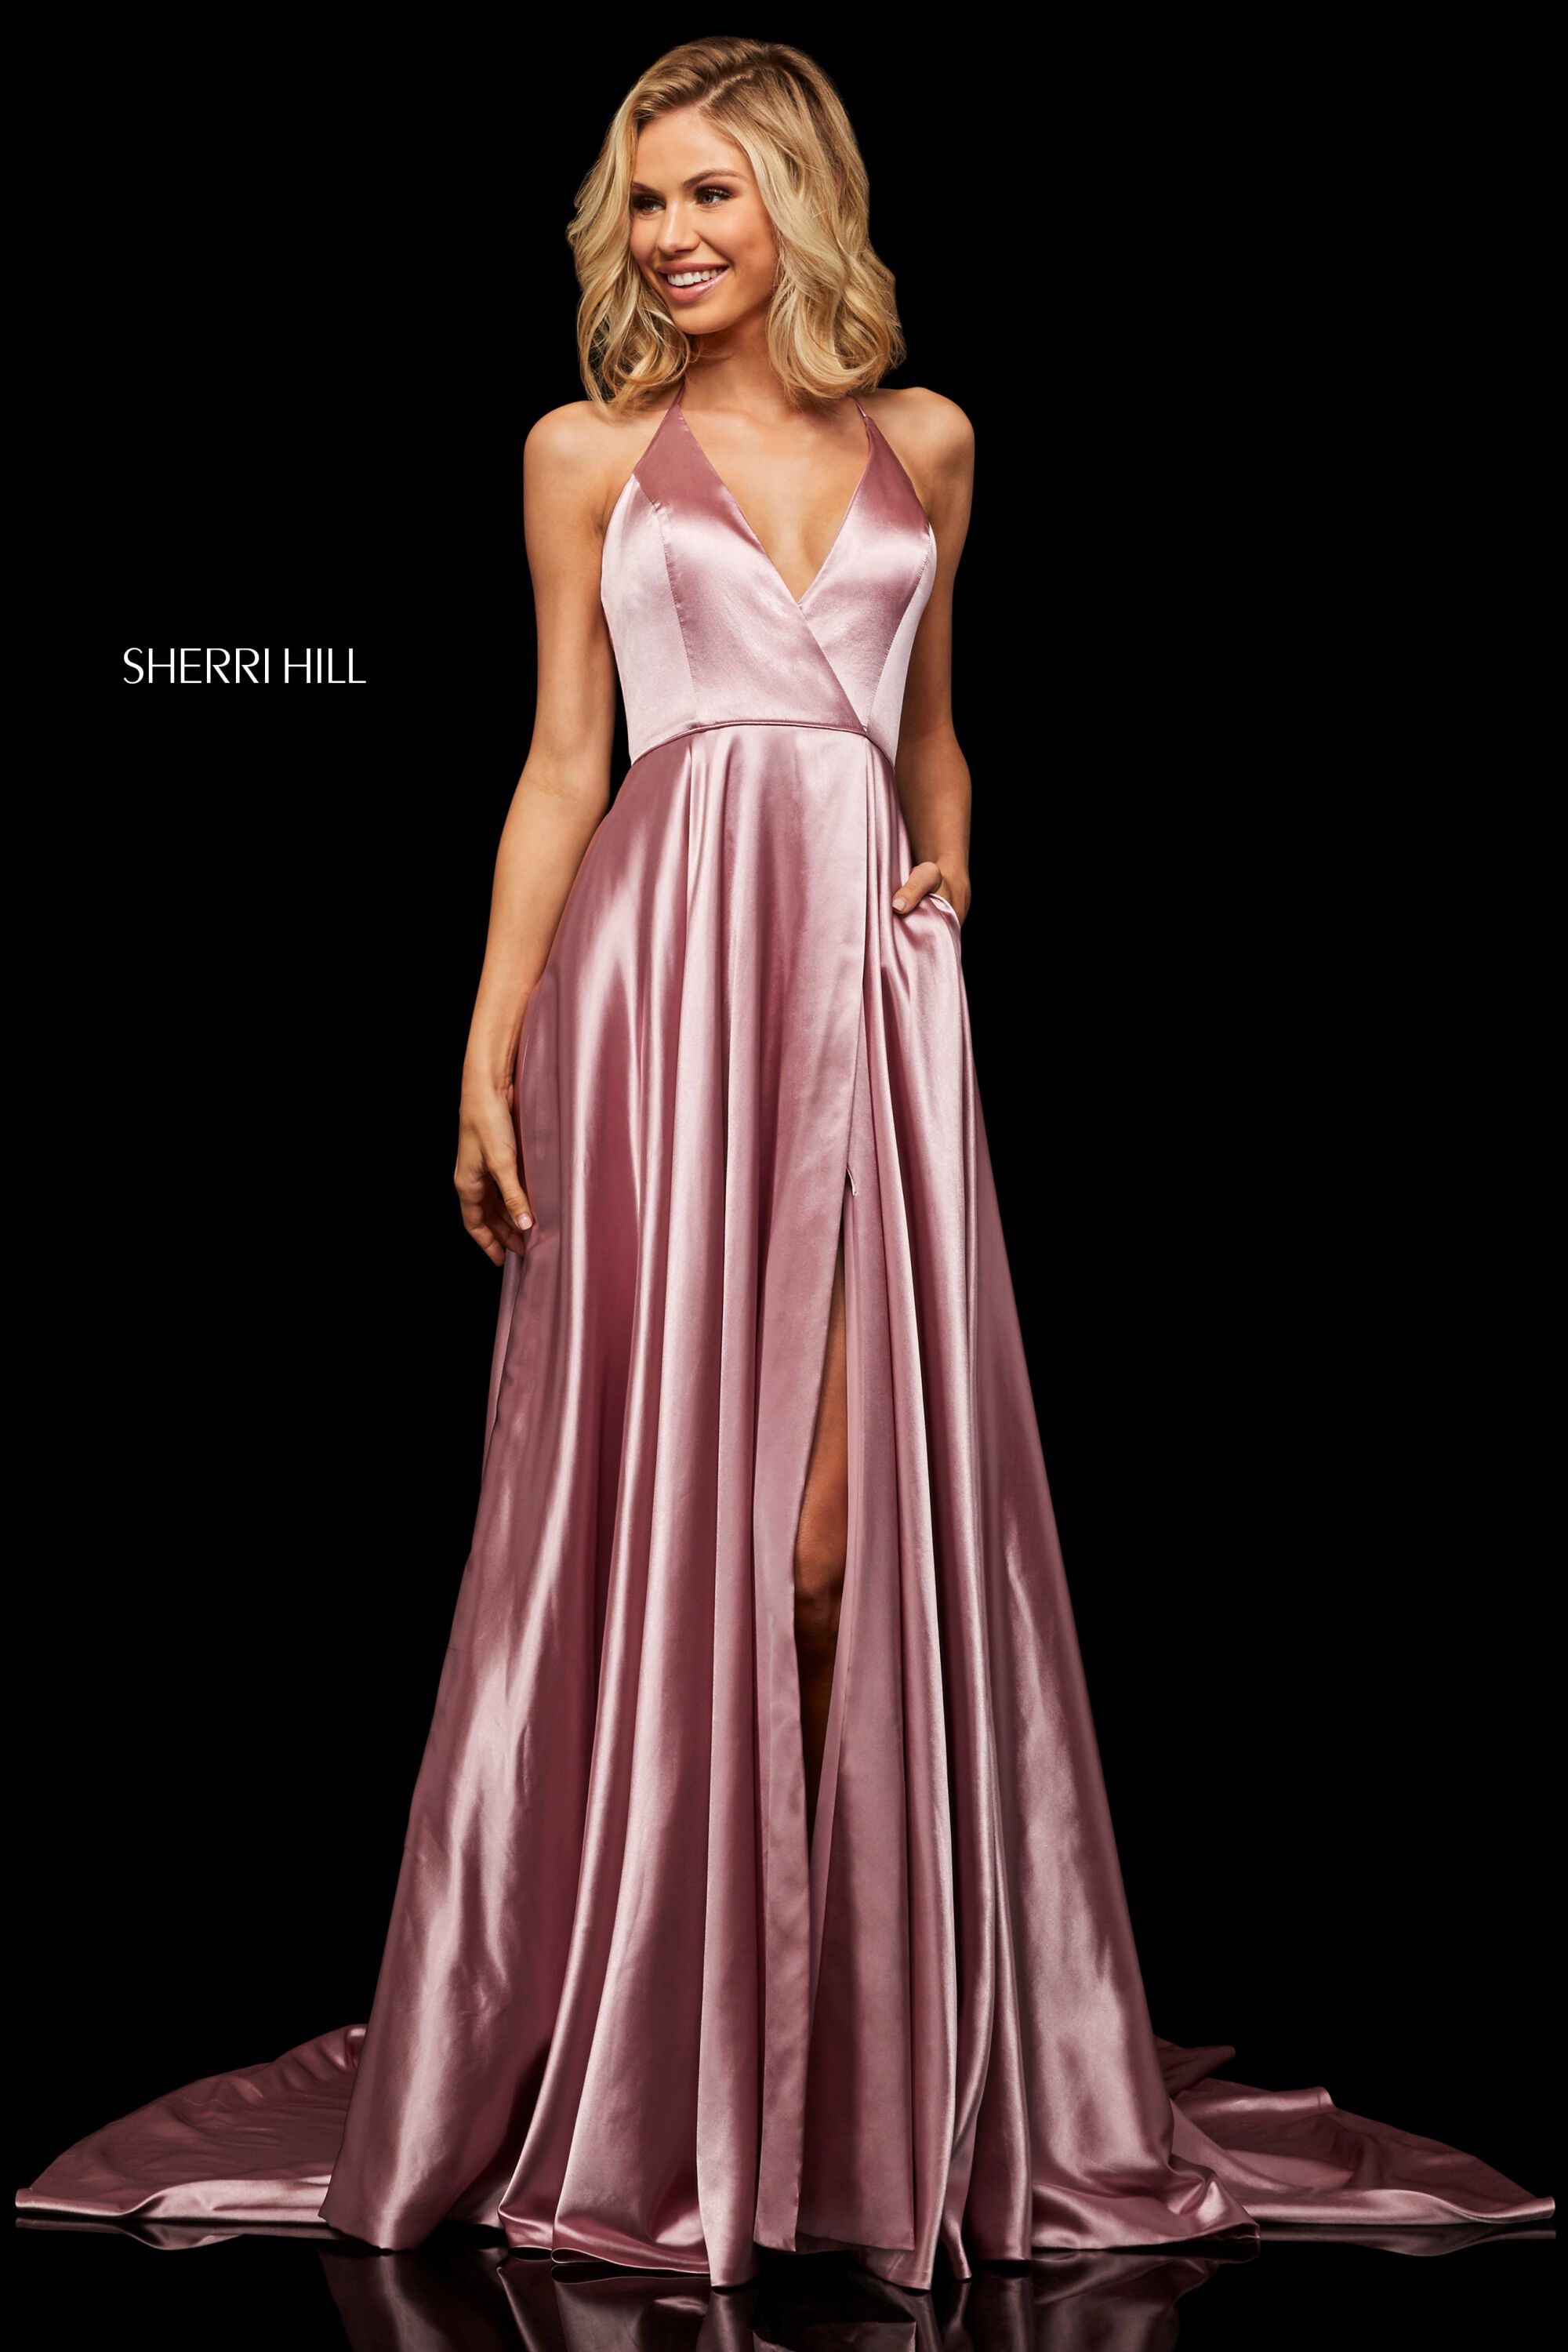 style № 52921 designed by SherriHill